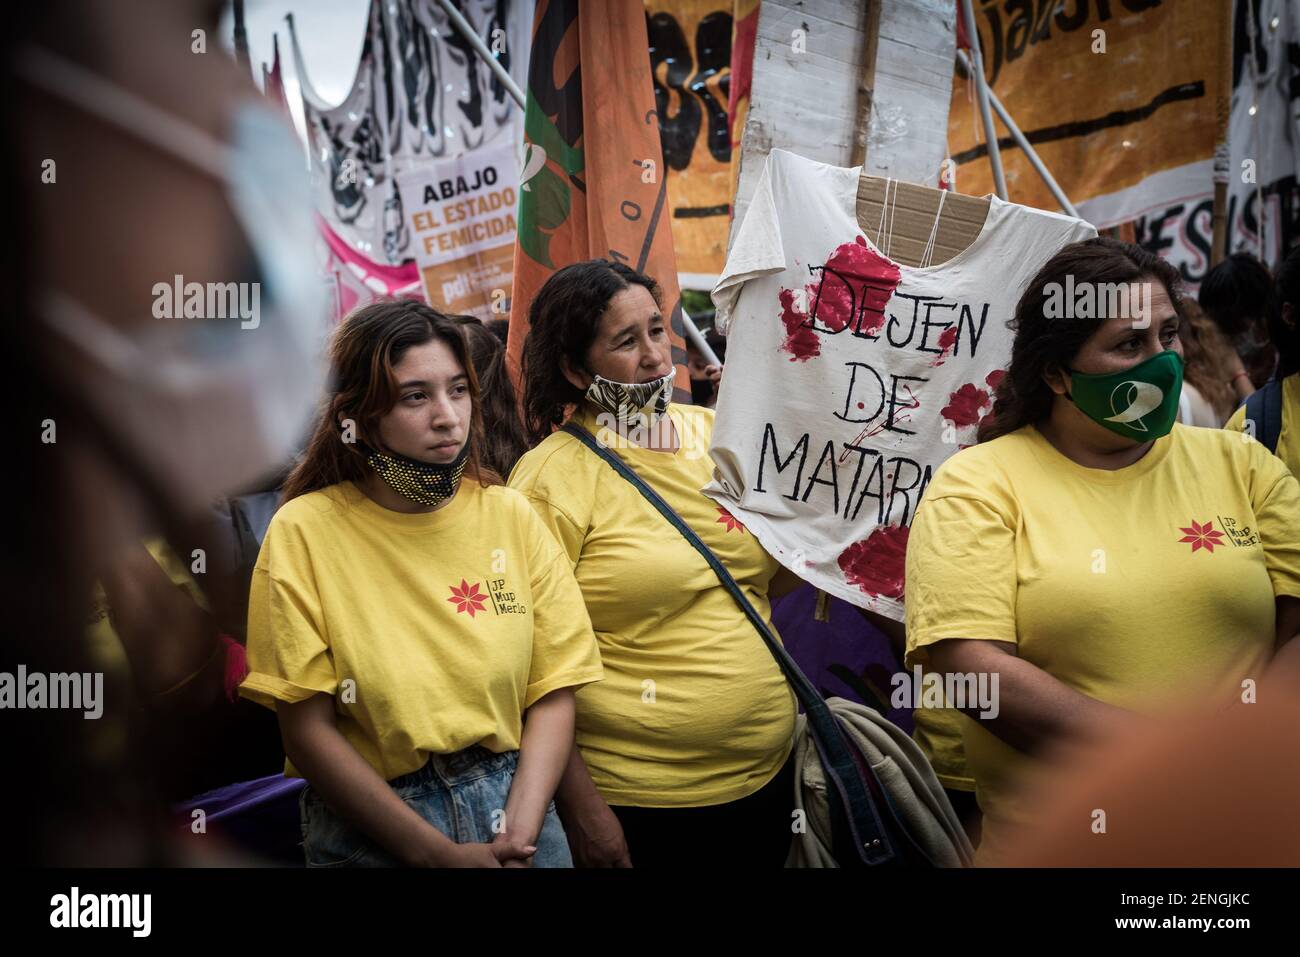 Alejo Manuel Avila/ Le Pictorium -  Protest for the murder of Ursula Bahillo to the Courthouse -  17/02/2021  -  Argentina / Buenos Aires  -  The Wome Stock Photo